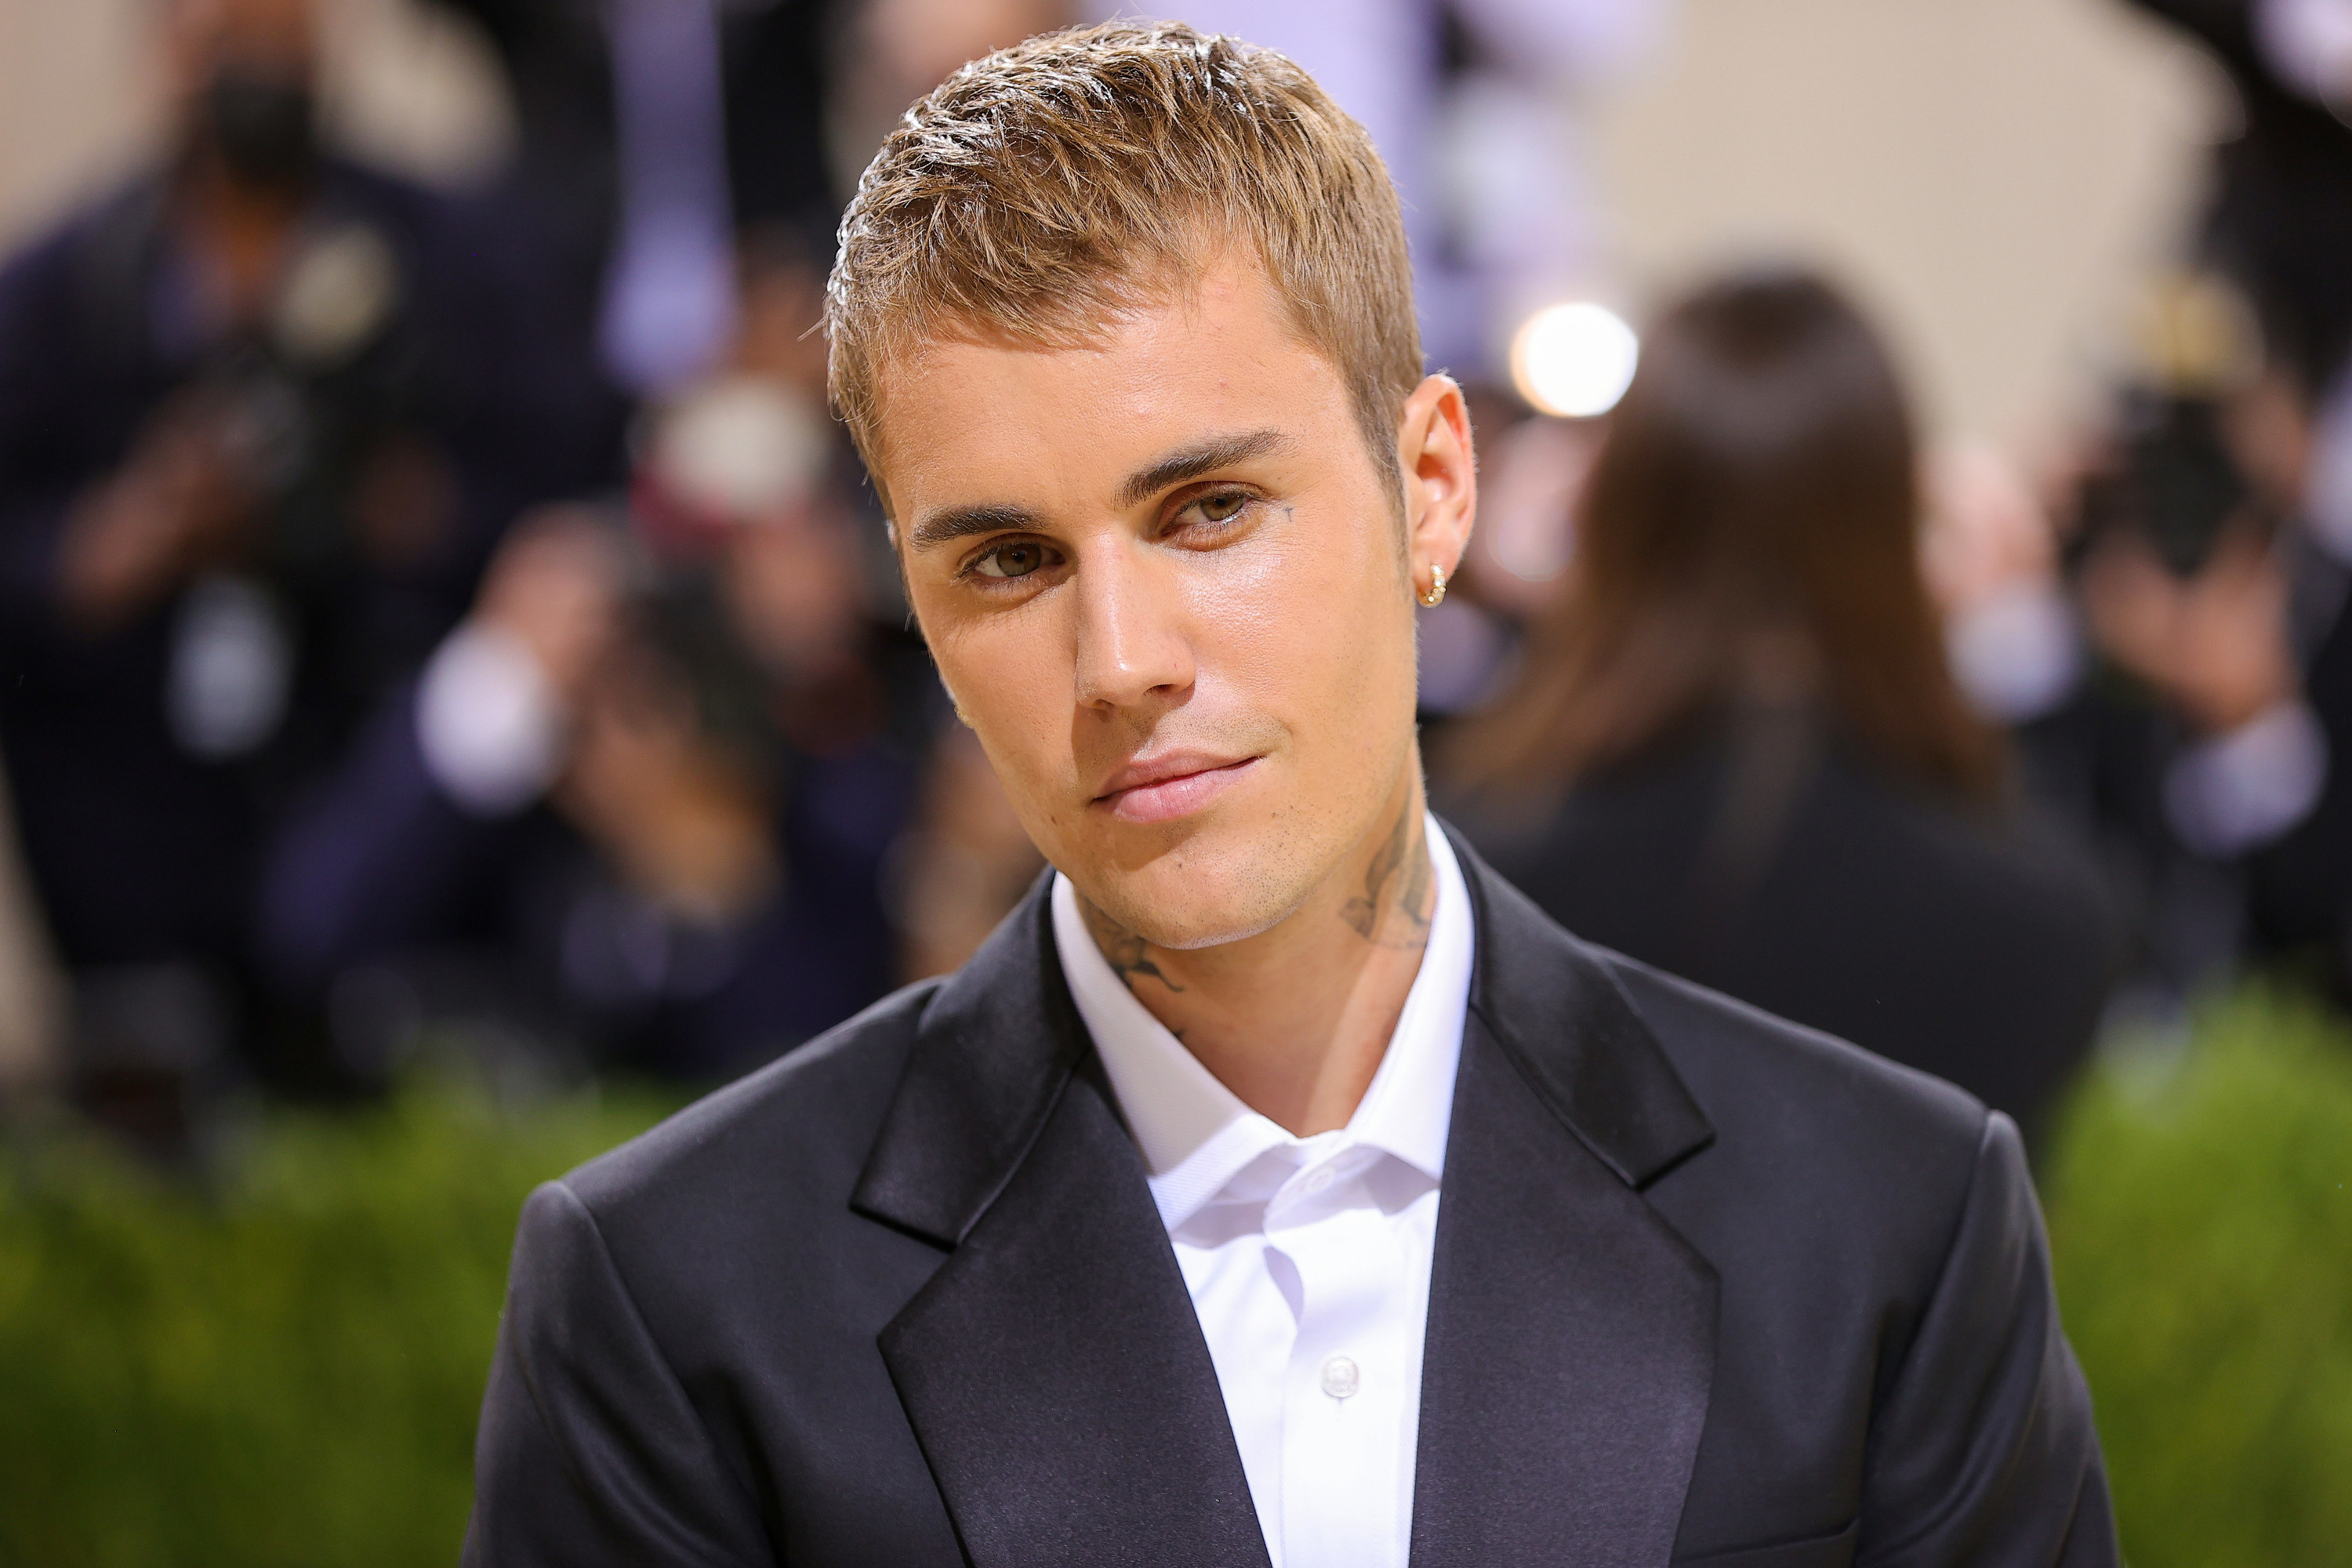 Justin Bieber attends The 2021 Met Gala Celebrating In America: A Lexicon Of Fashion at Metropolitan Museum of Art on September 13, 2021